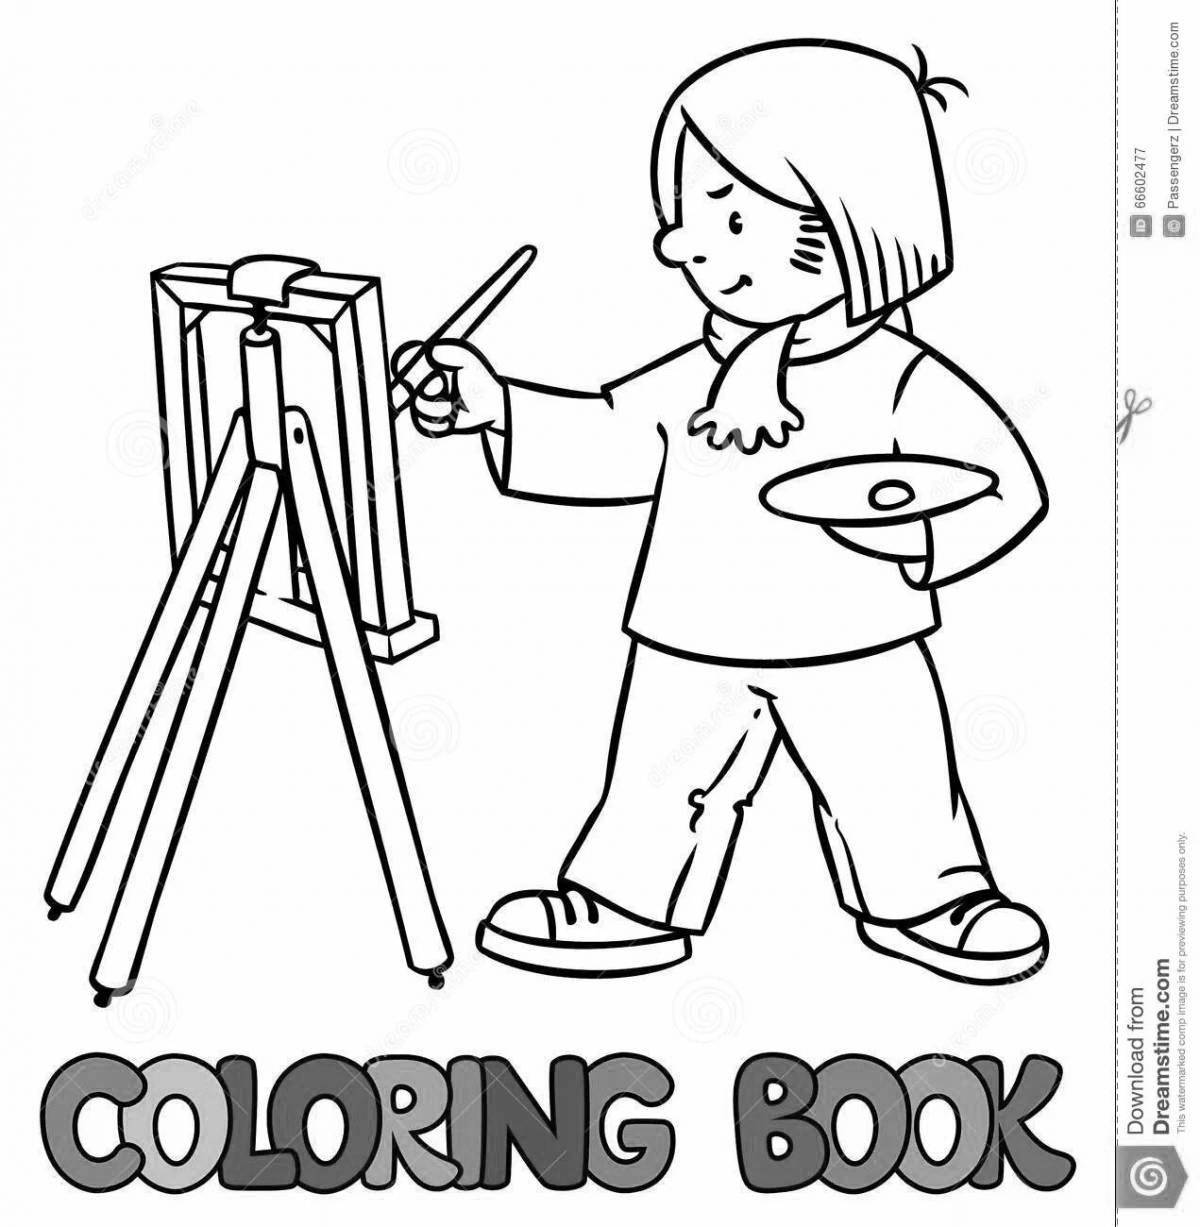 Bright color painting easel